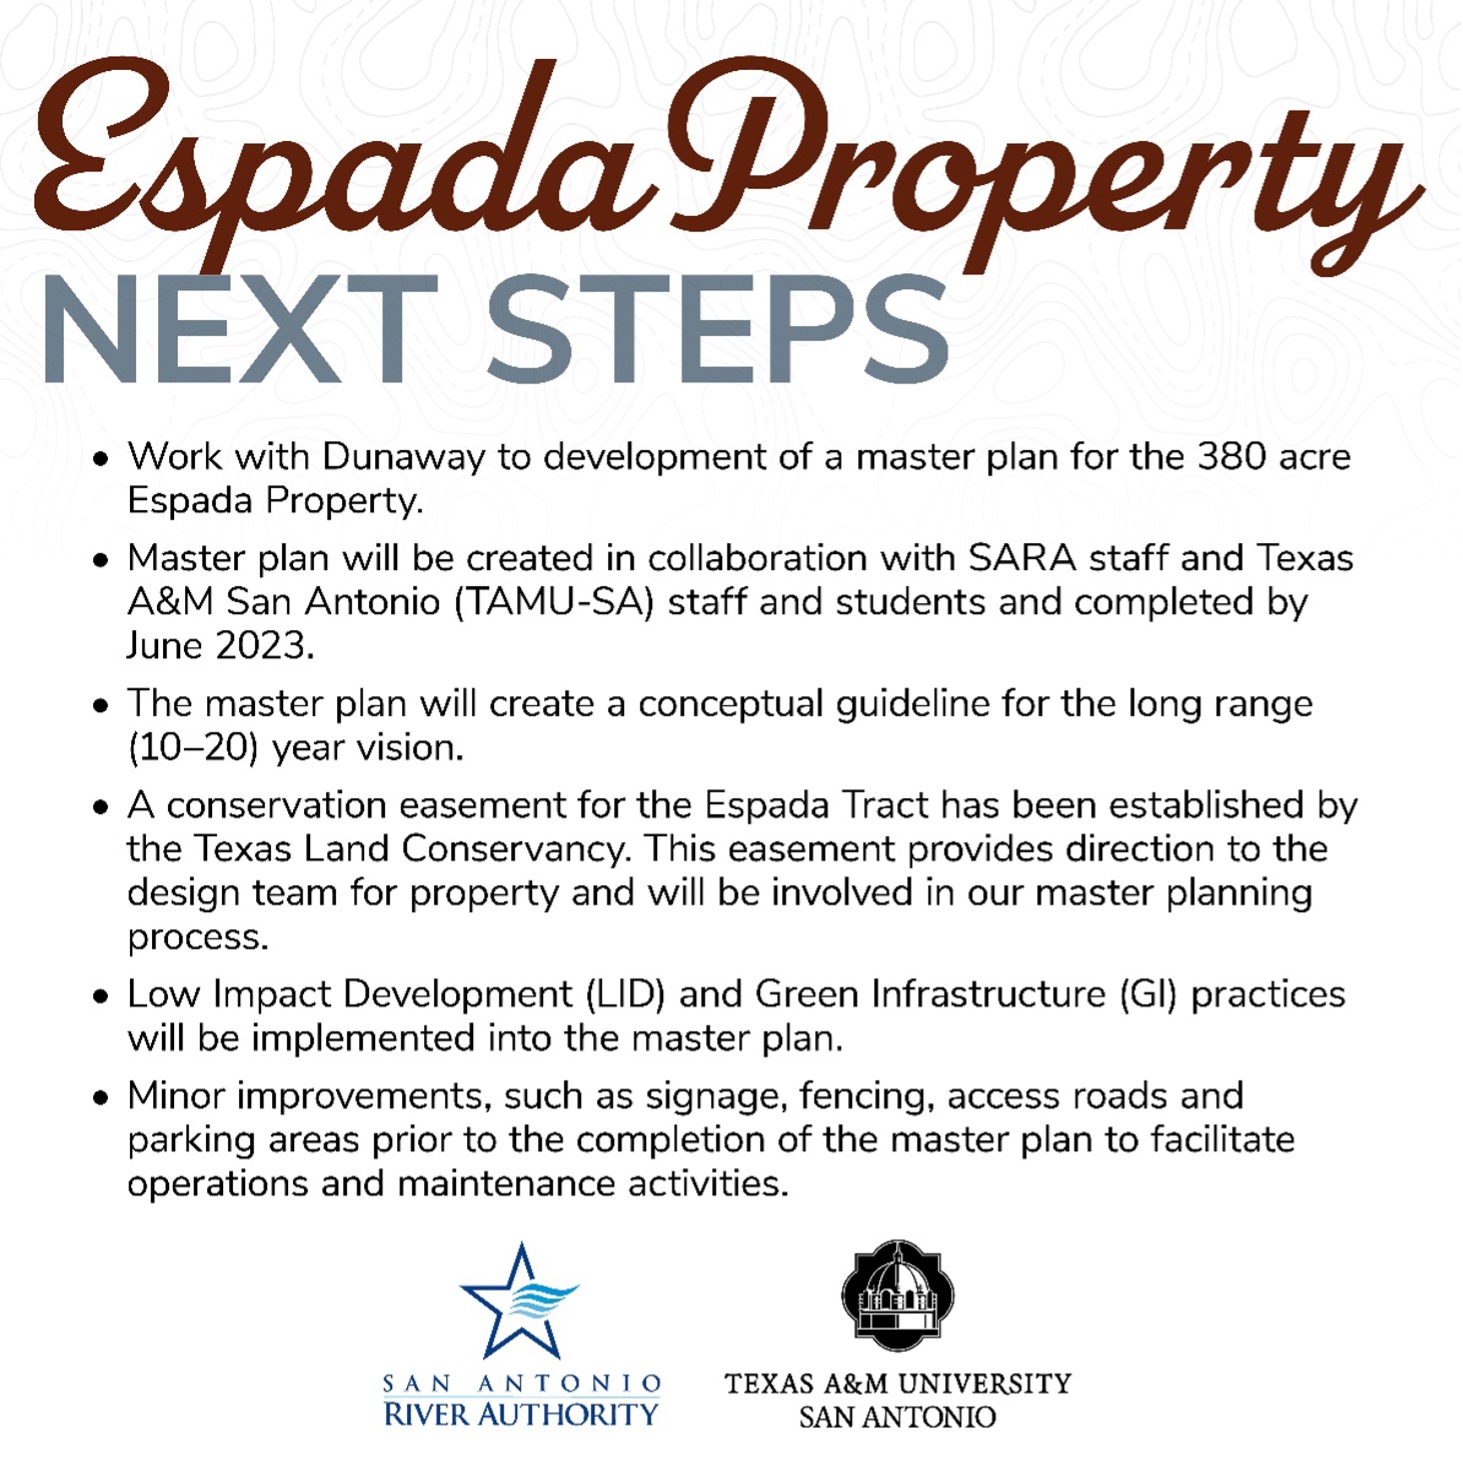 Sign that outlines next steps for the Espada Property